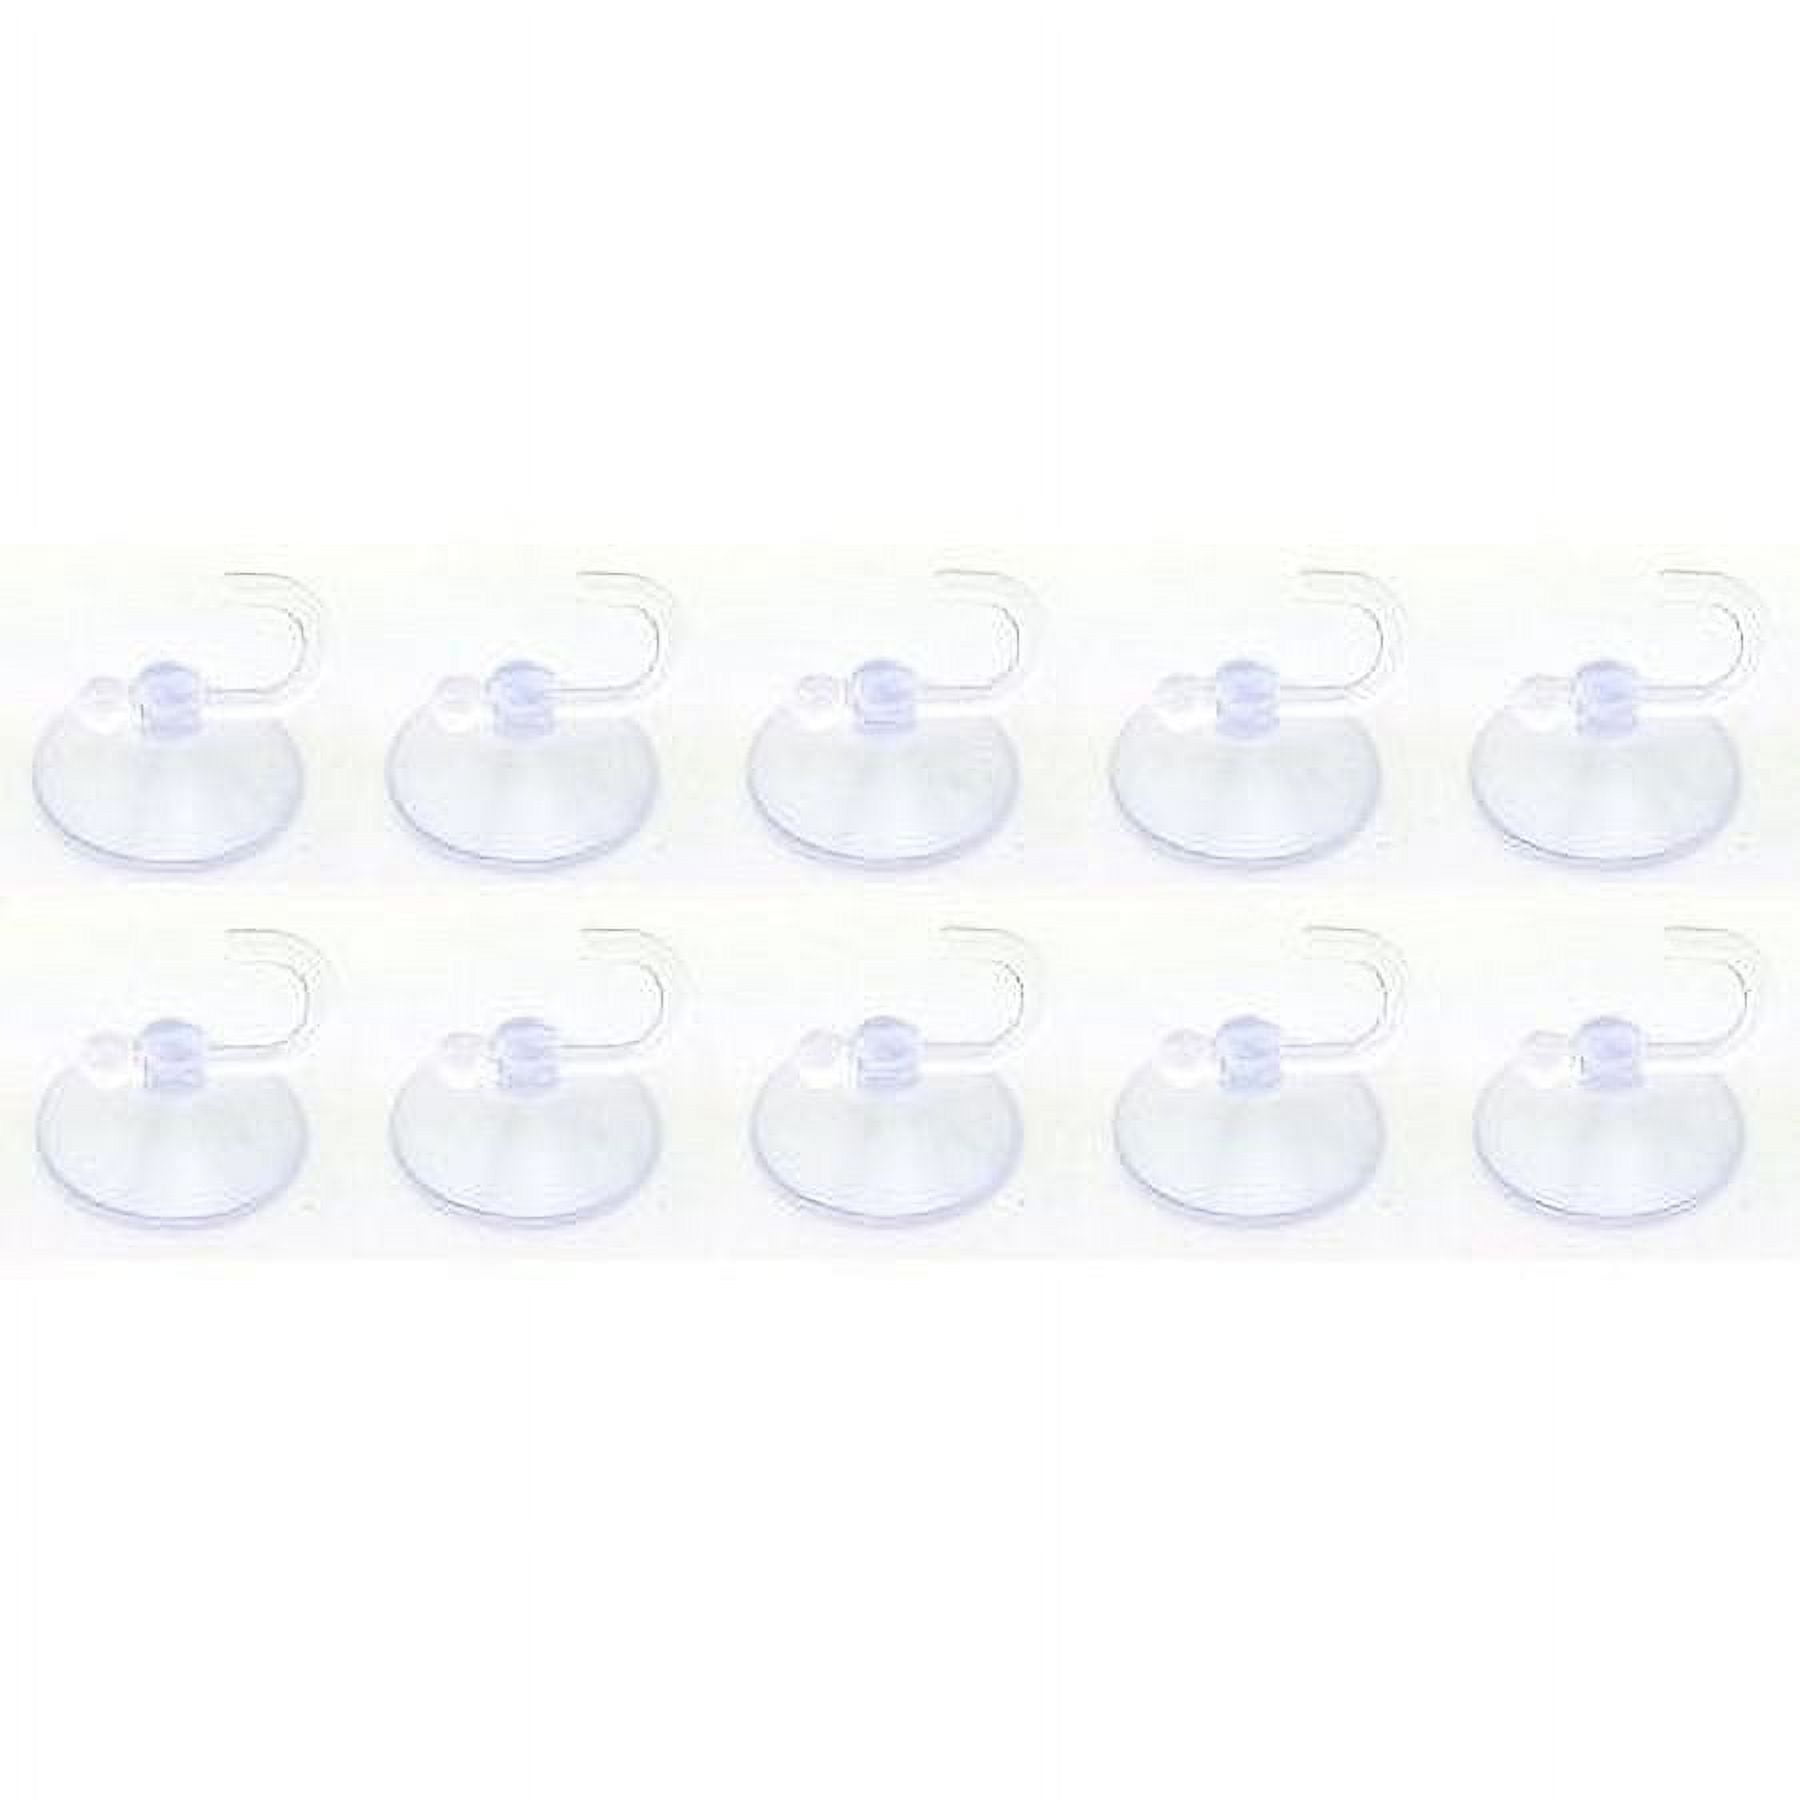 OOK 5 lb. Clear-Plastic Suction-Cup Hooks (3-Pack) 54404 - The Home Depot